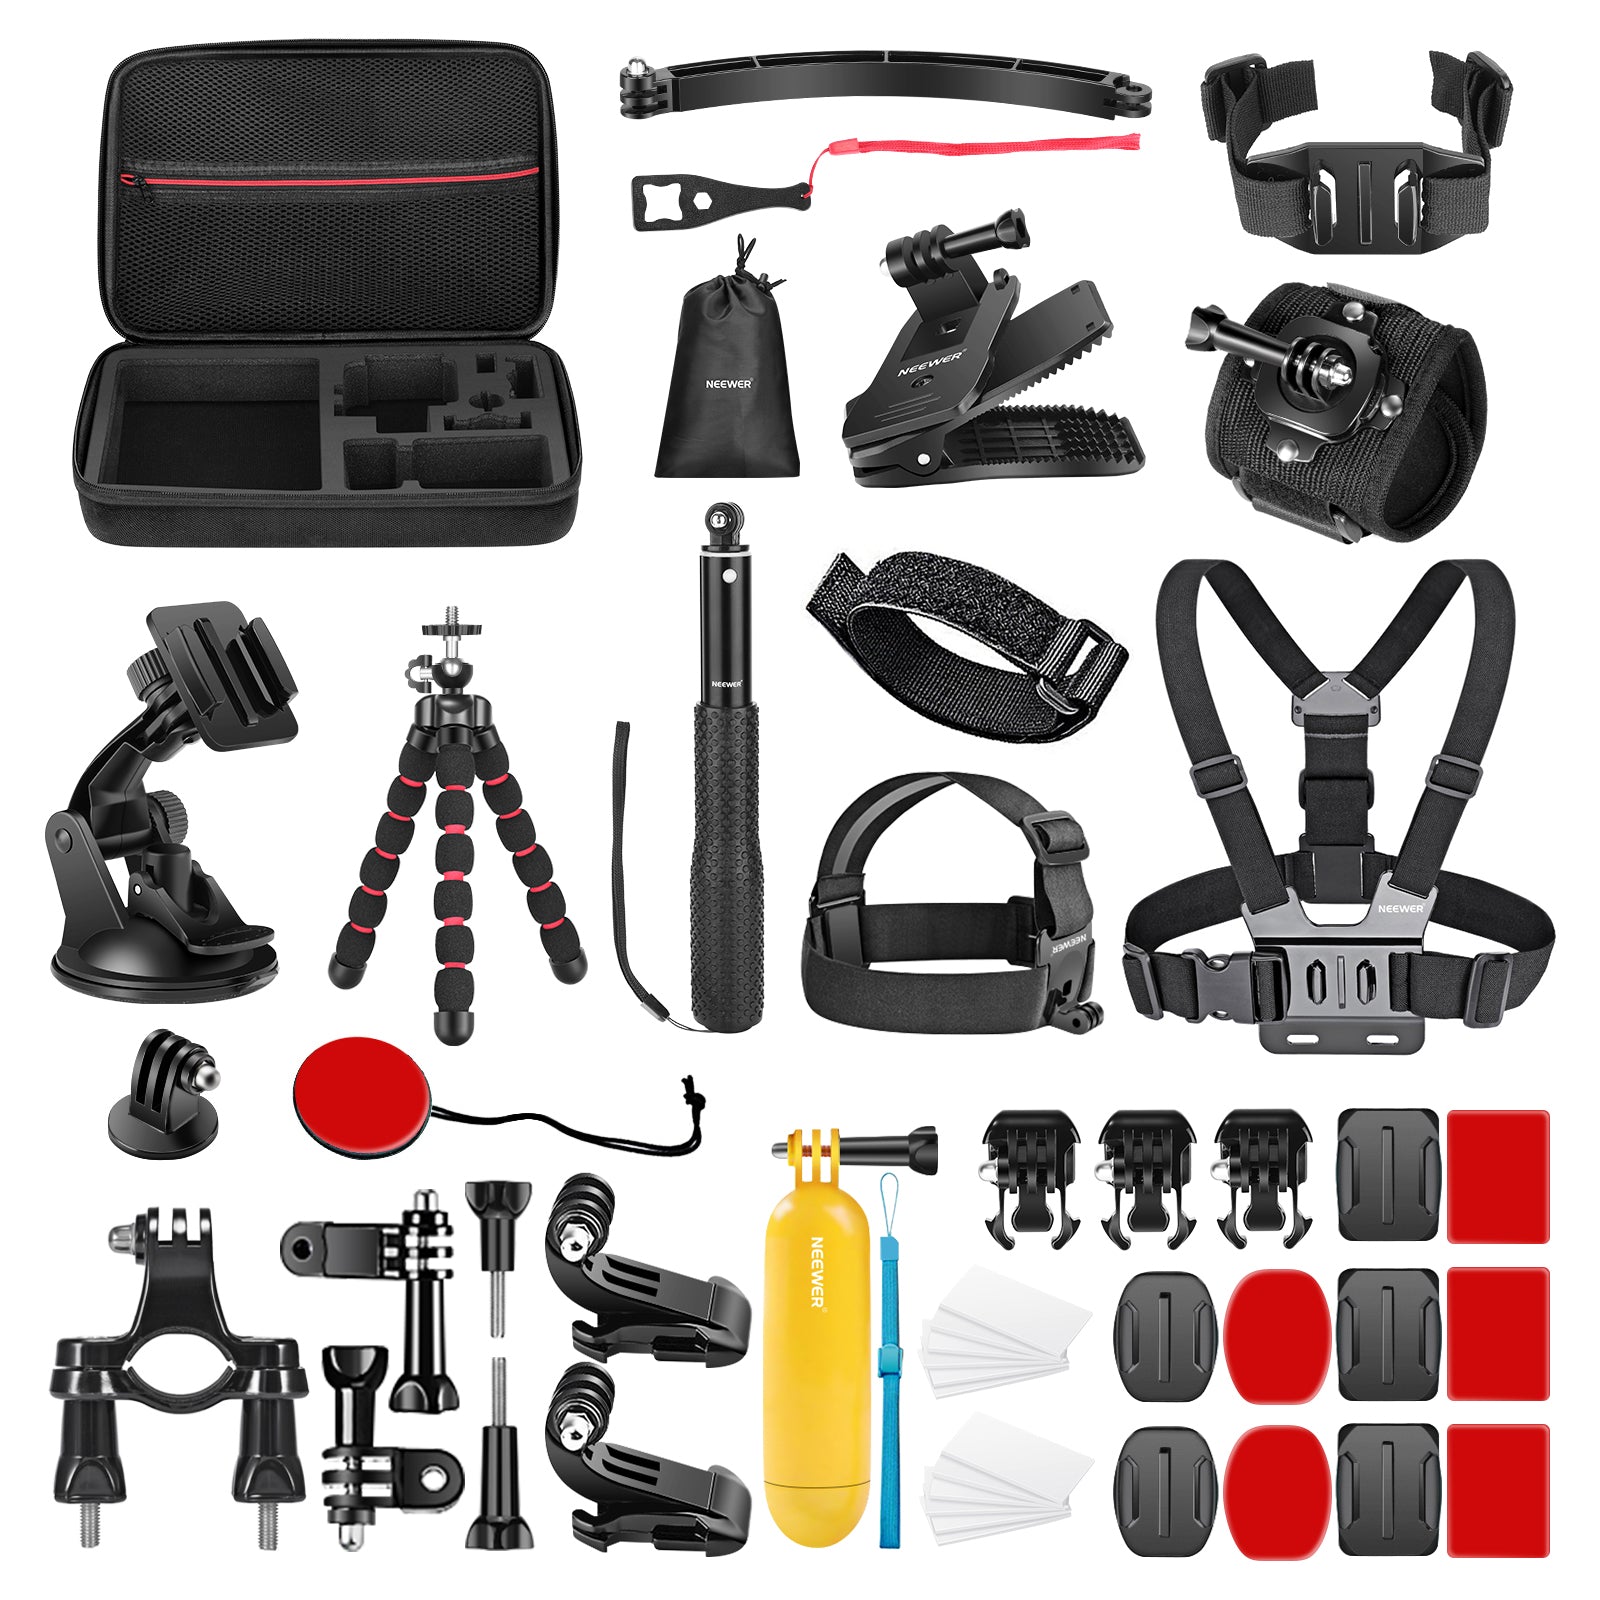 NEEWER Upgraded 50-in-1 Action Camera Accessory Kit NEEWER neewer.com